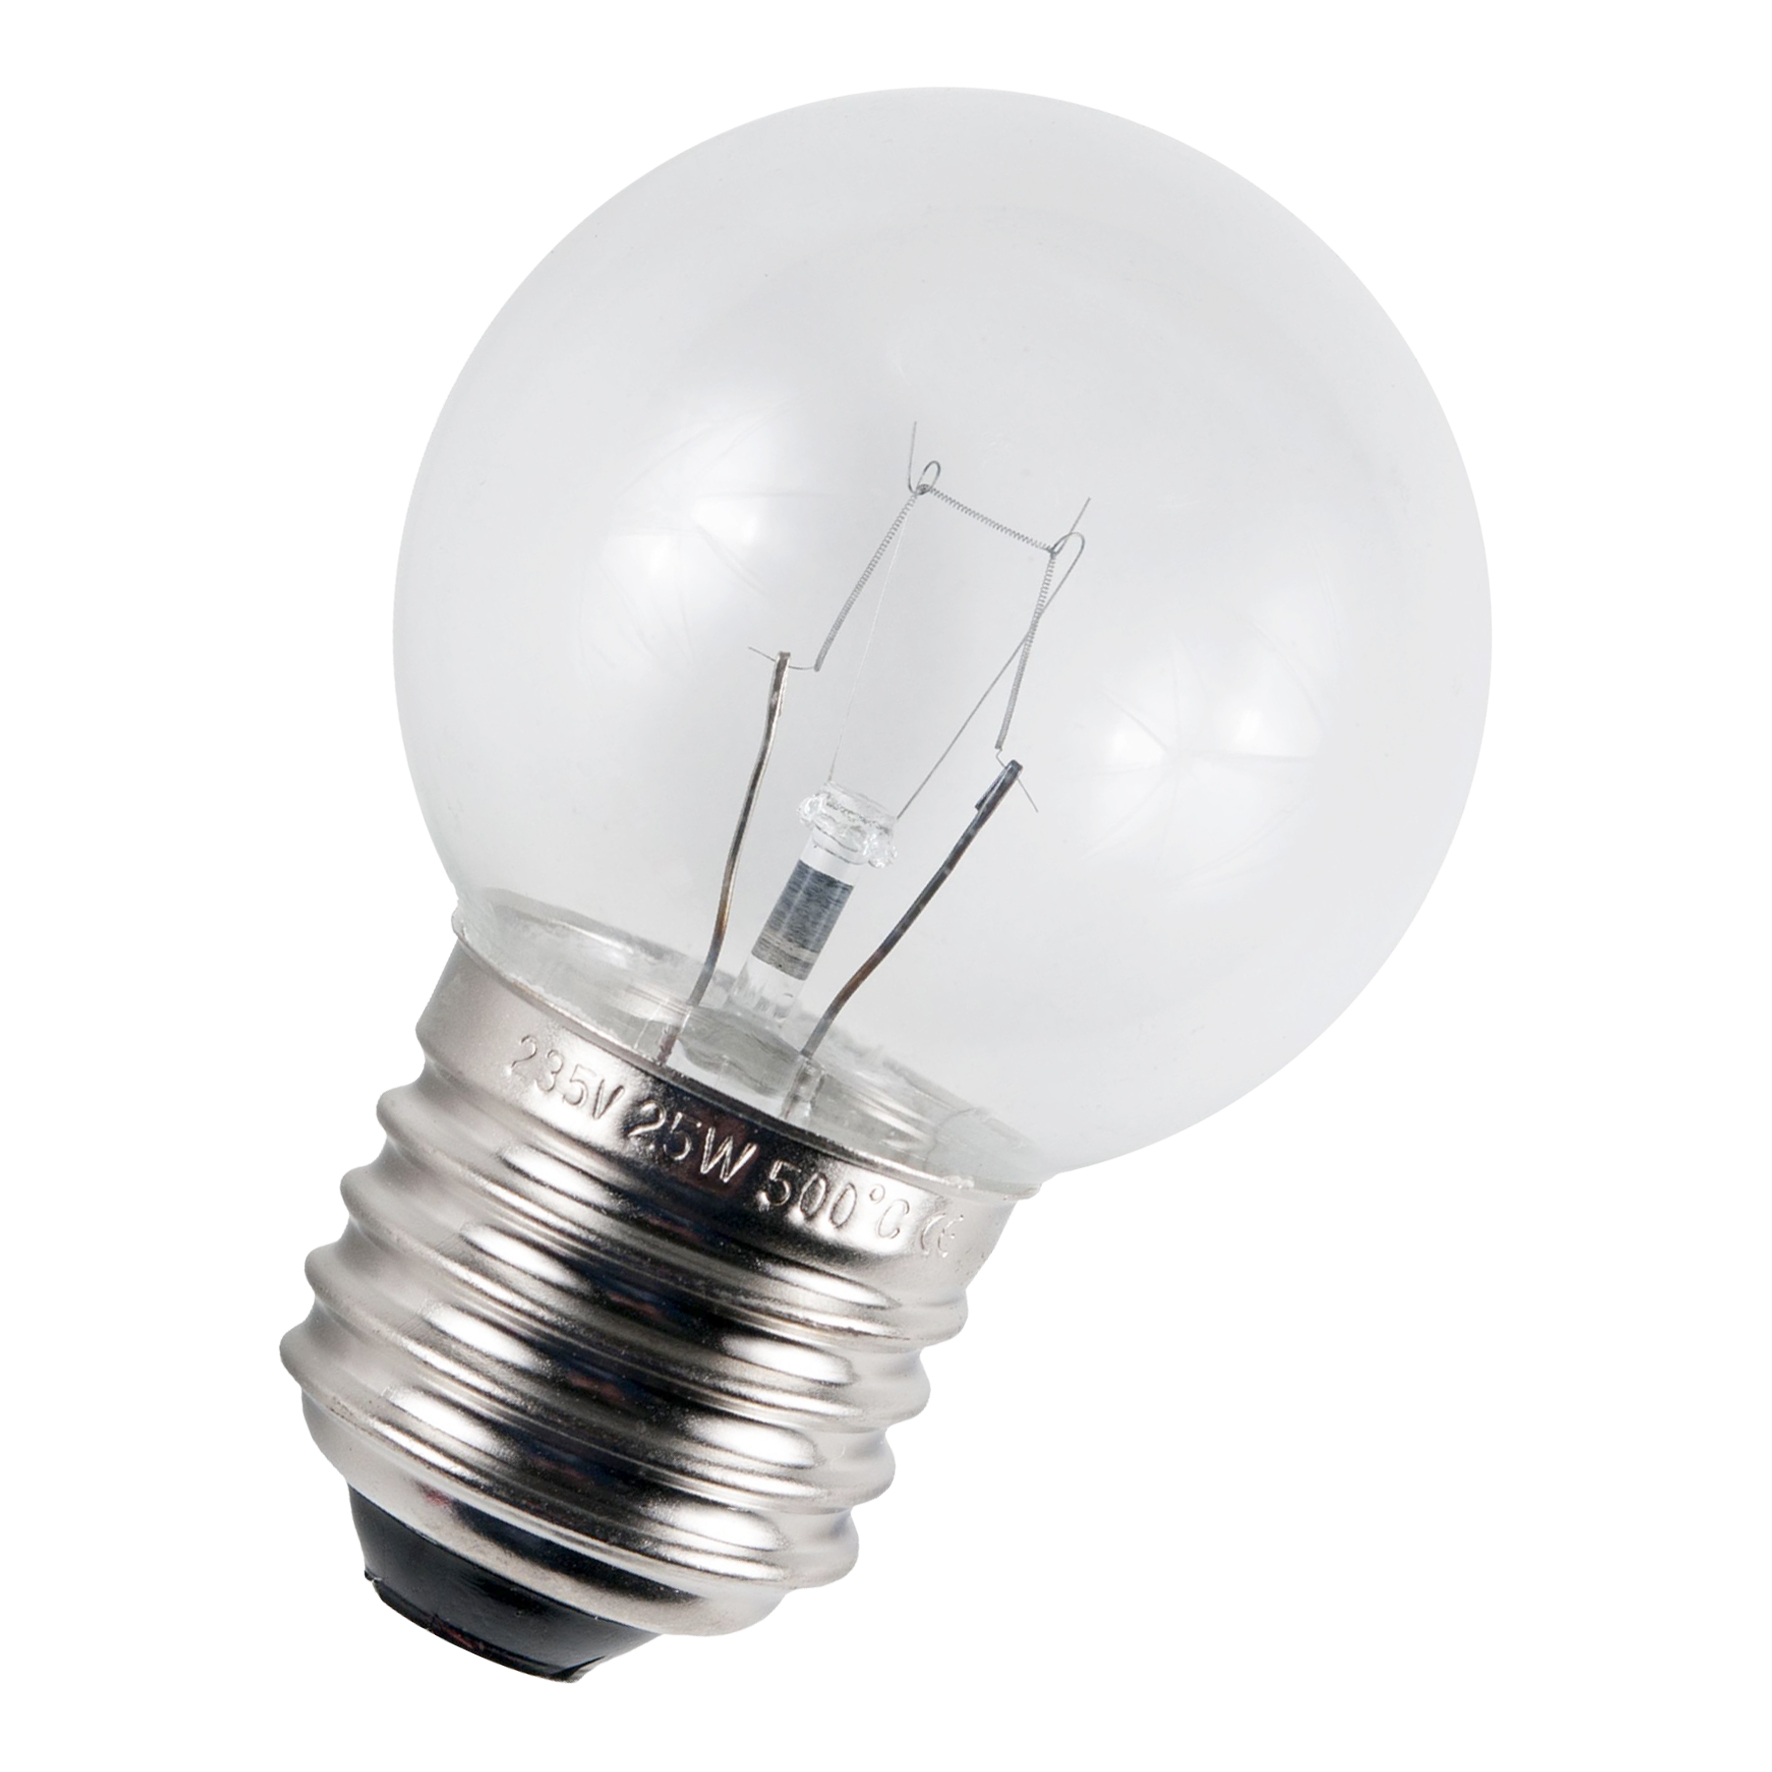 05994100030751 - Sphere-shaped incandescent lamp - Lamps - e-Bailey | Bailey